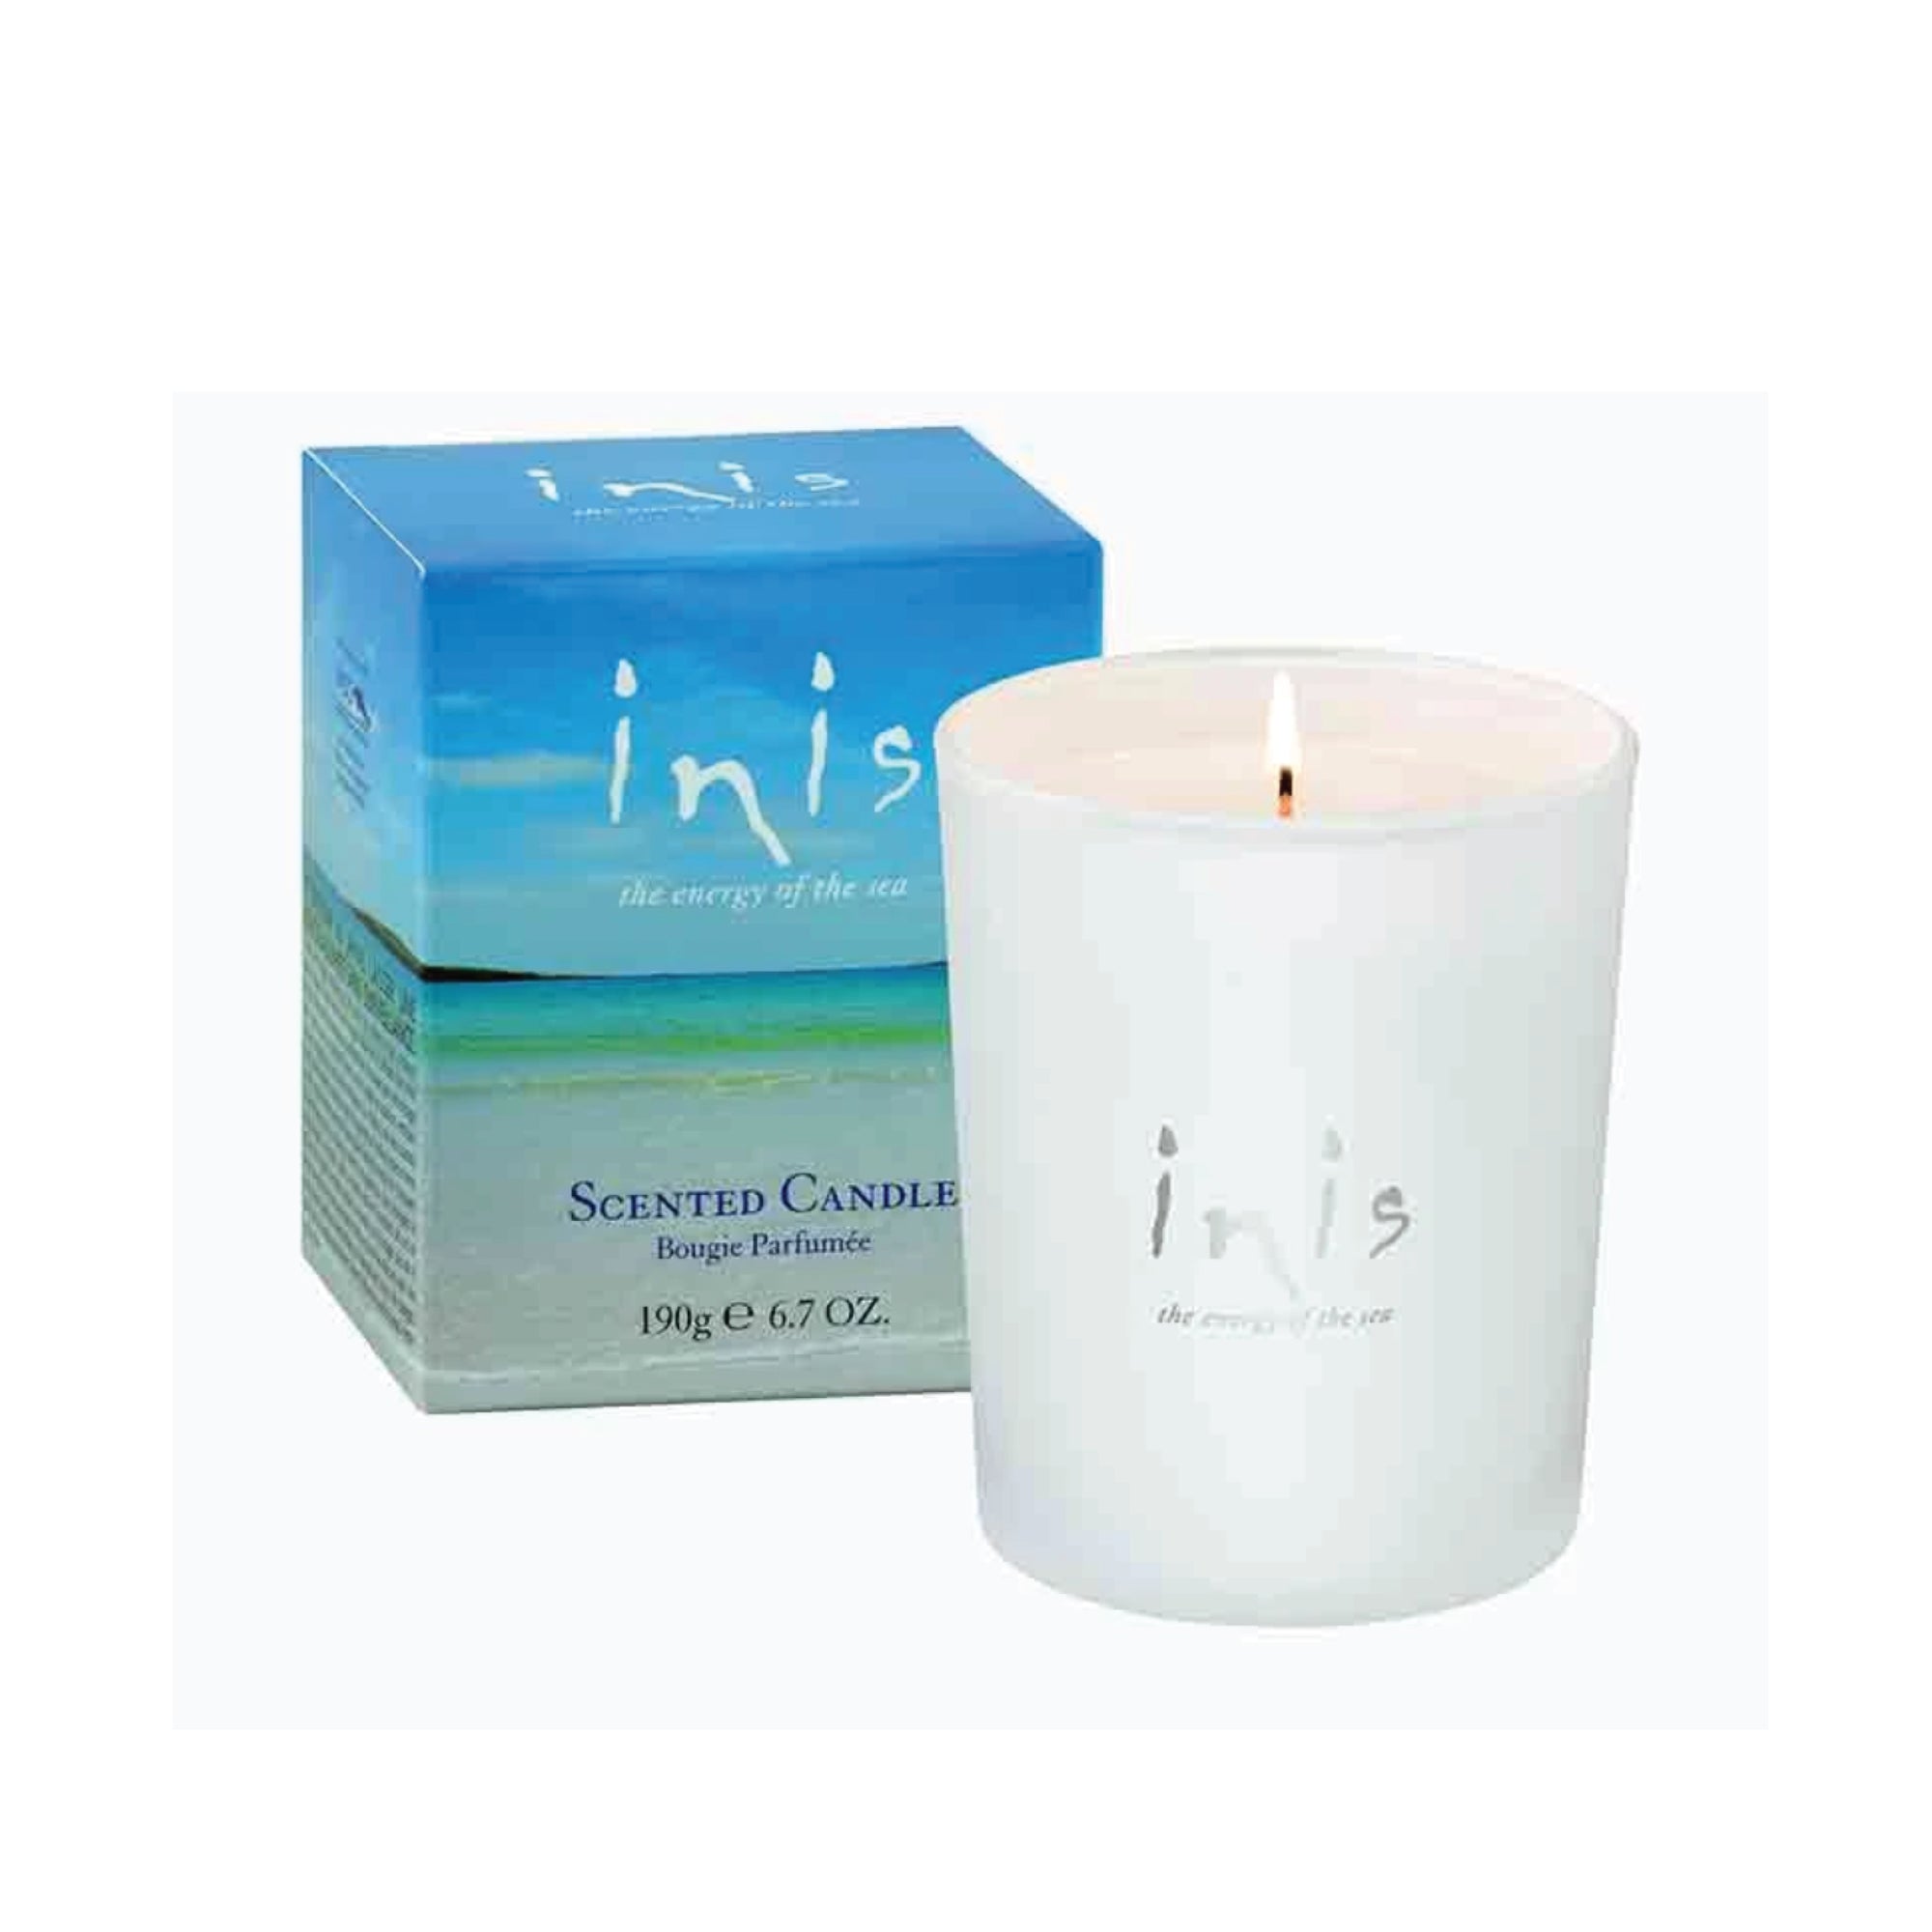 INIS THE ENERGY OF THE SEA SCENTED CANDLE – 190 G/6.7 OZ